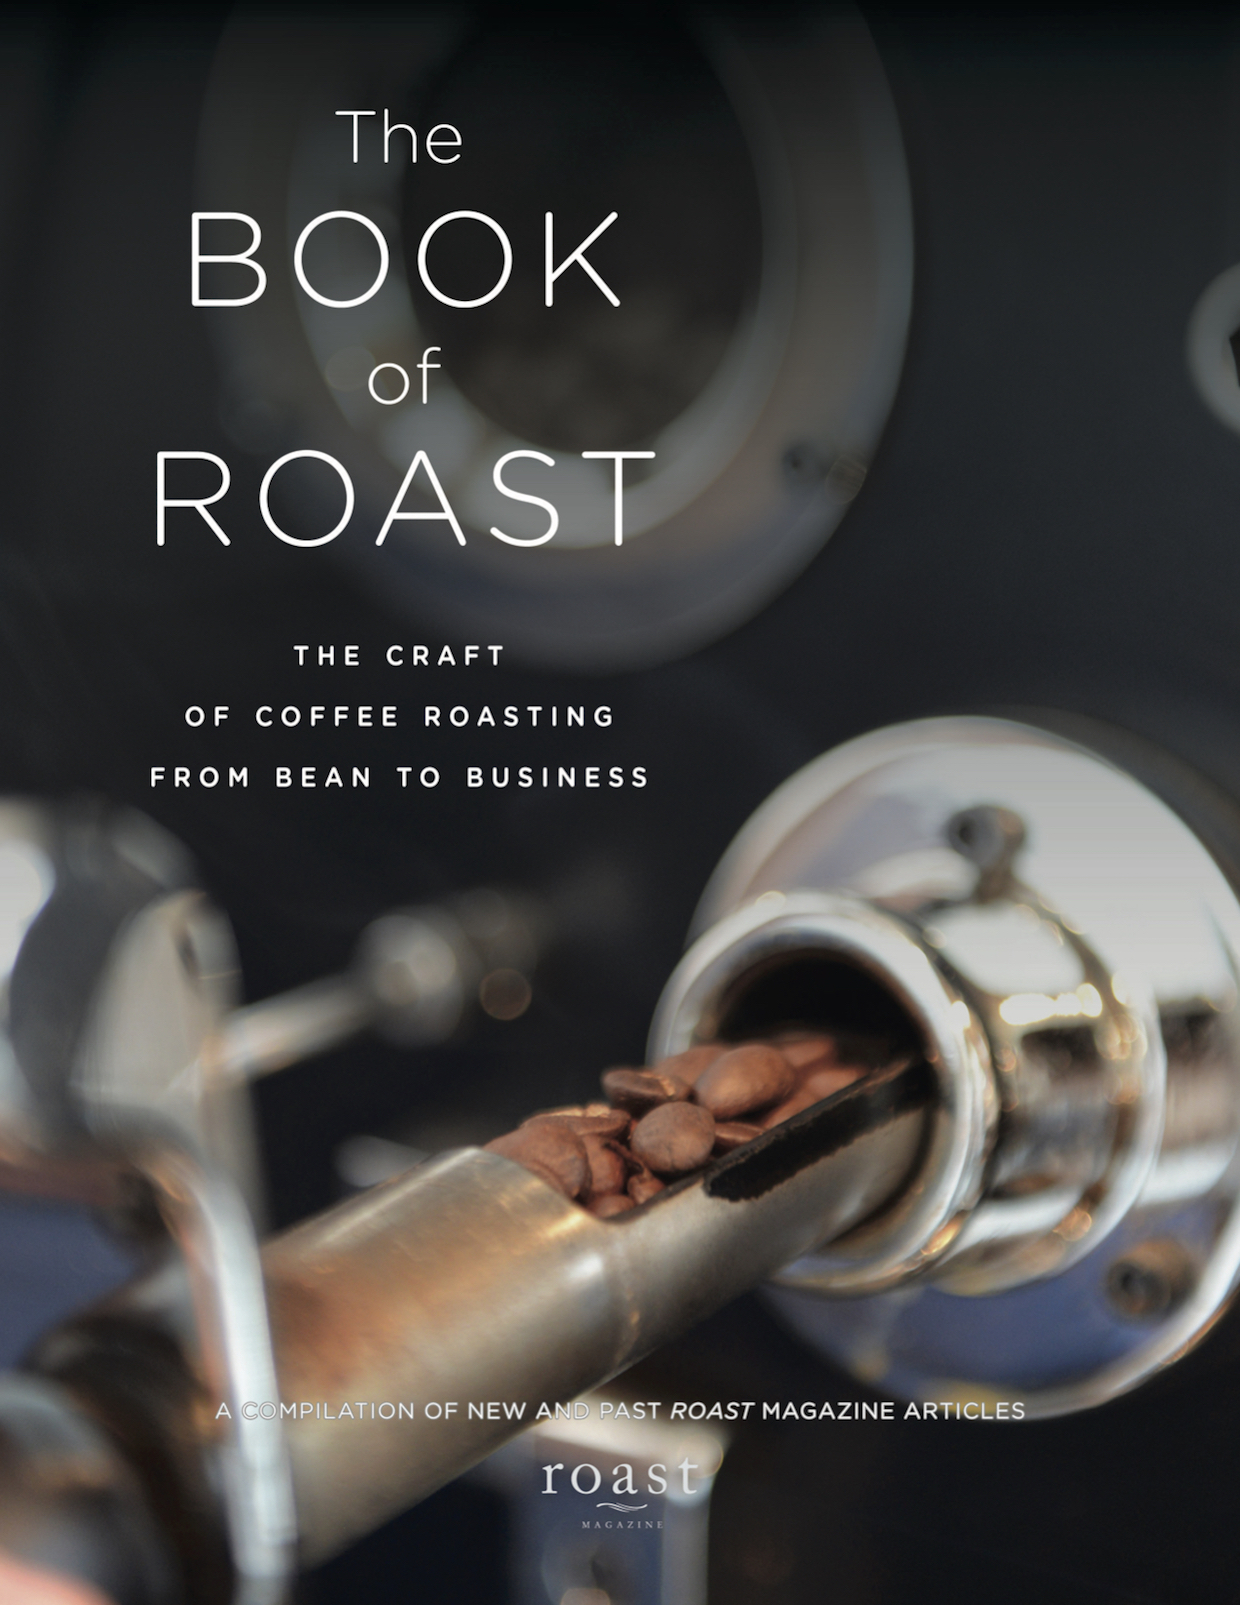 TheBookofRoast_Cover